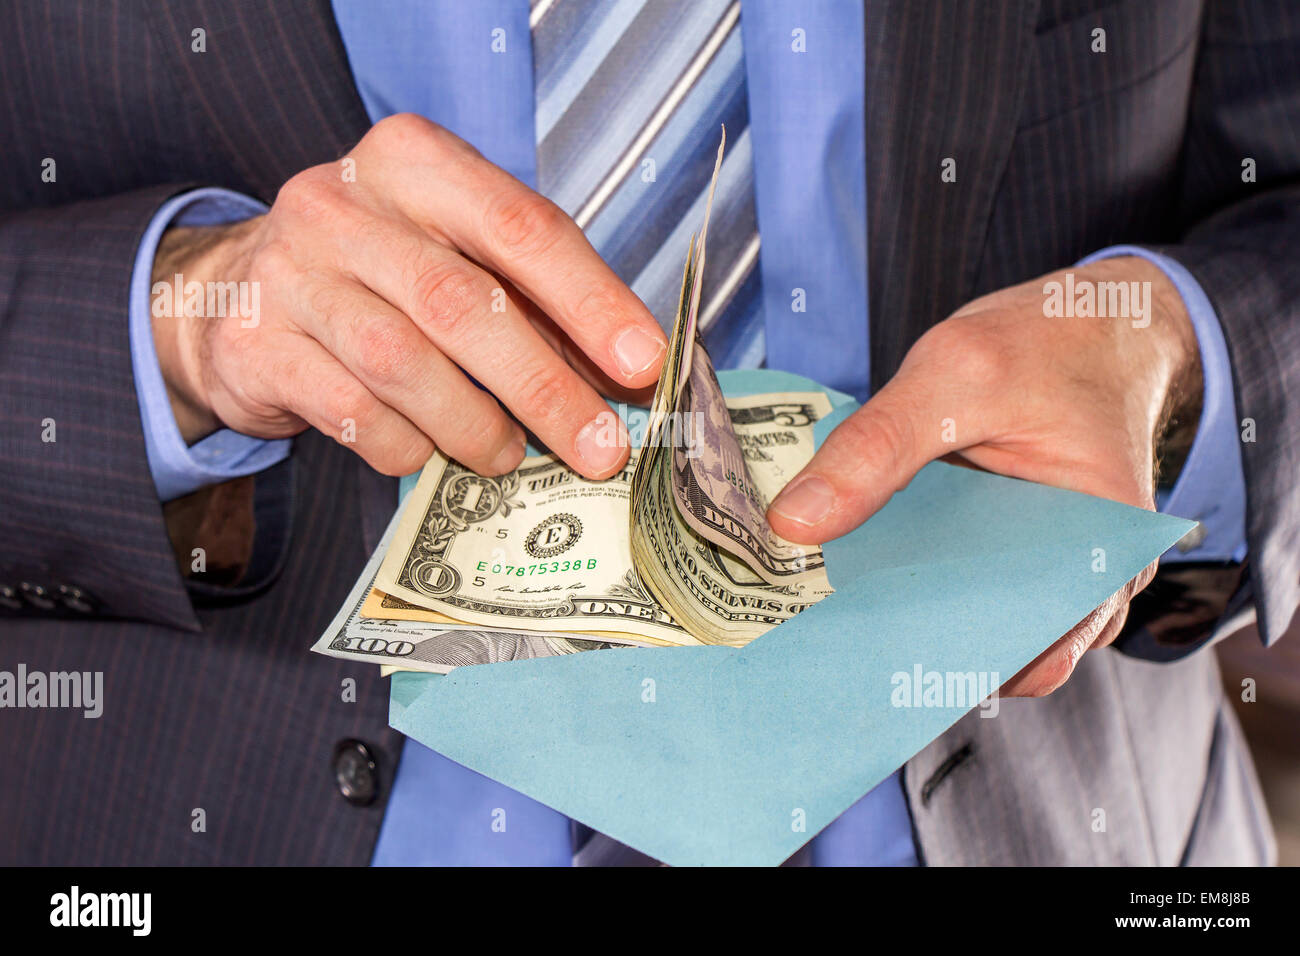 Businessman counting dollars bribe in a blue envelope Stock Photo